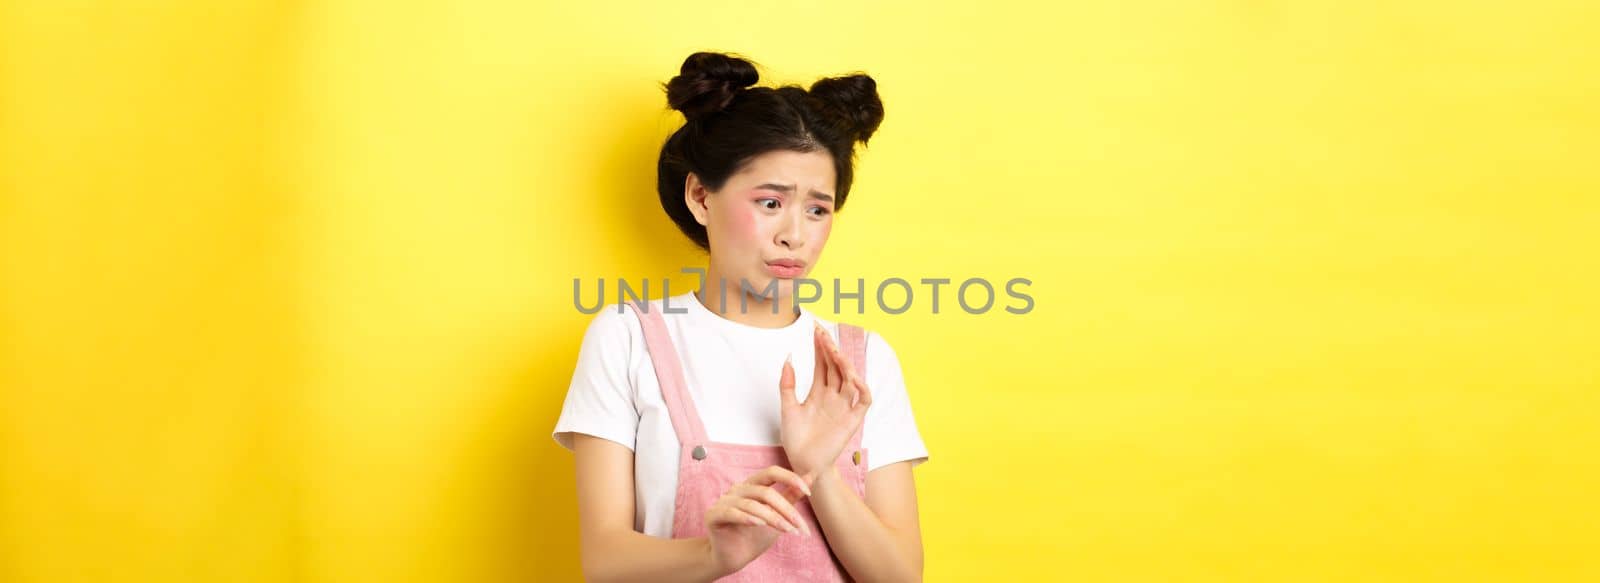 Disgusted asian girl raising hands up defensive, block something disgusting, turn away from aversion and reluctance, standing on yellow background.